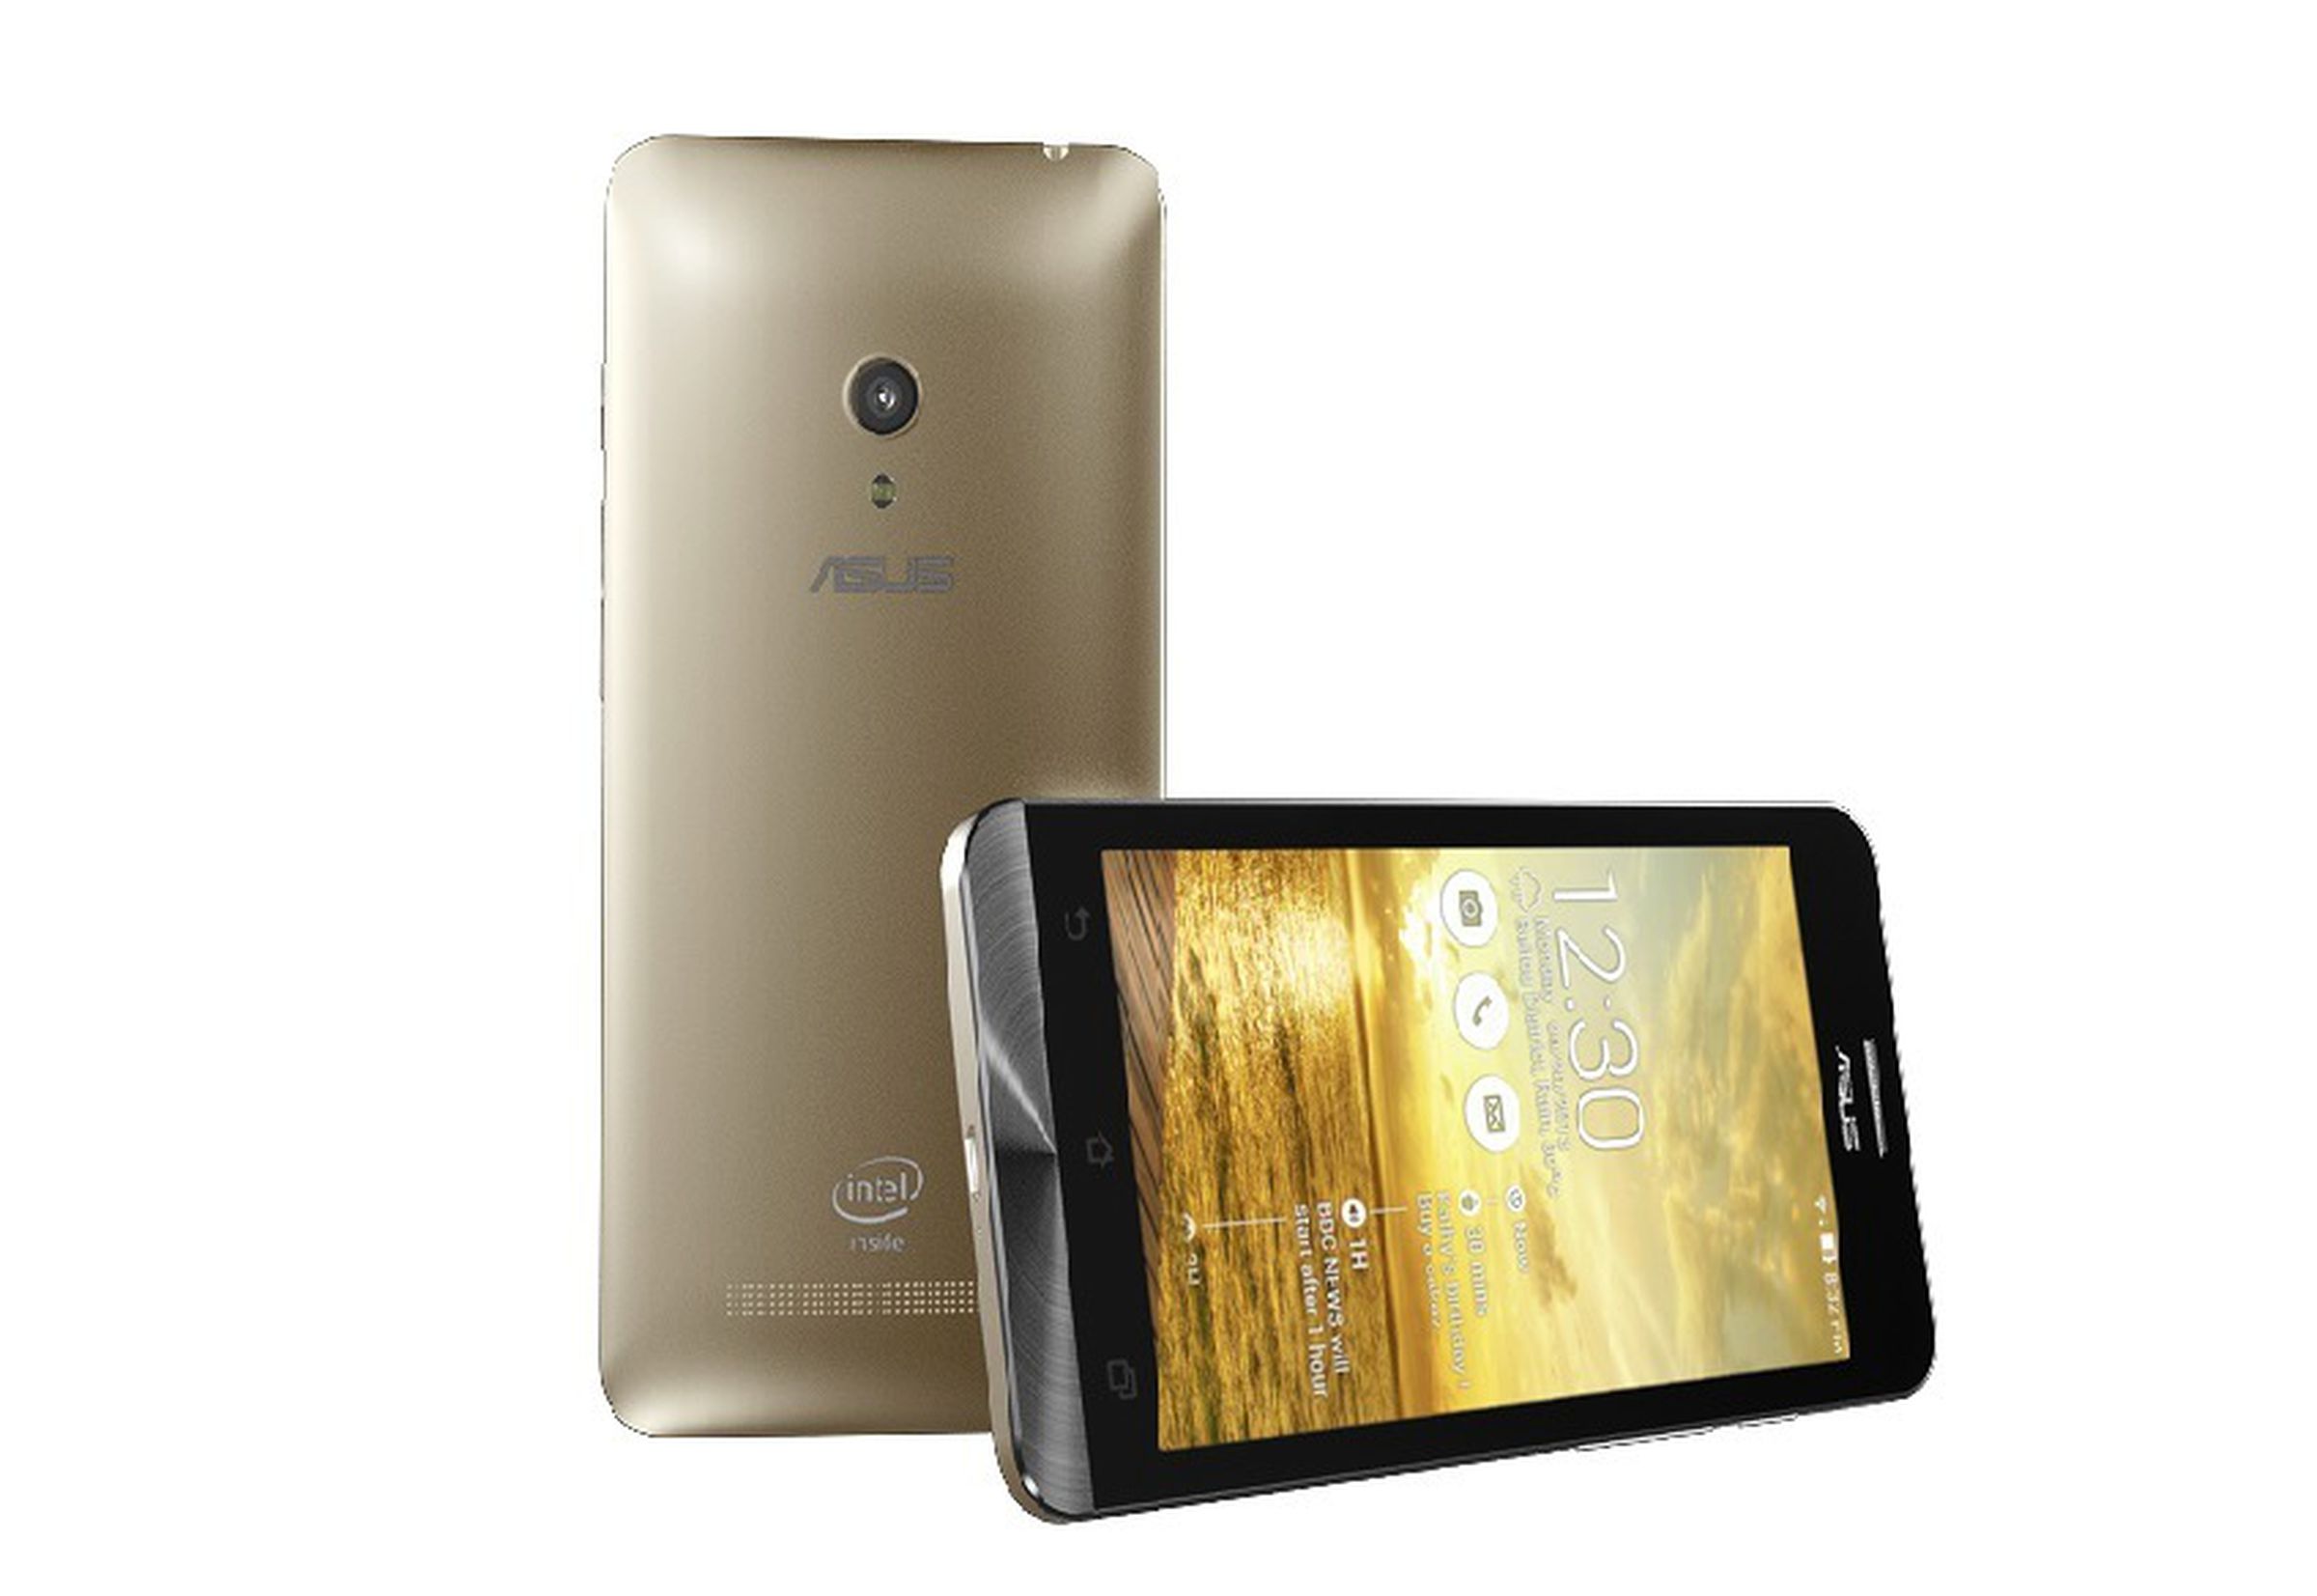 Asus PadFone mini and ZenFone pictures